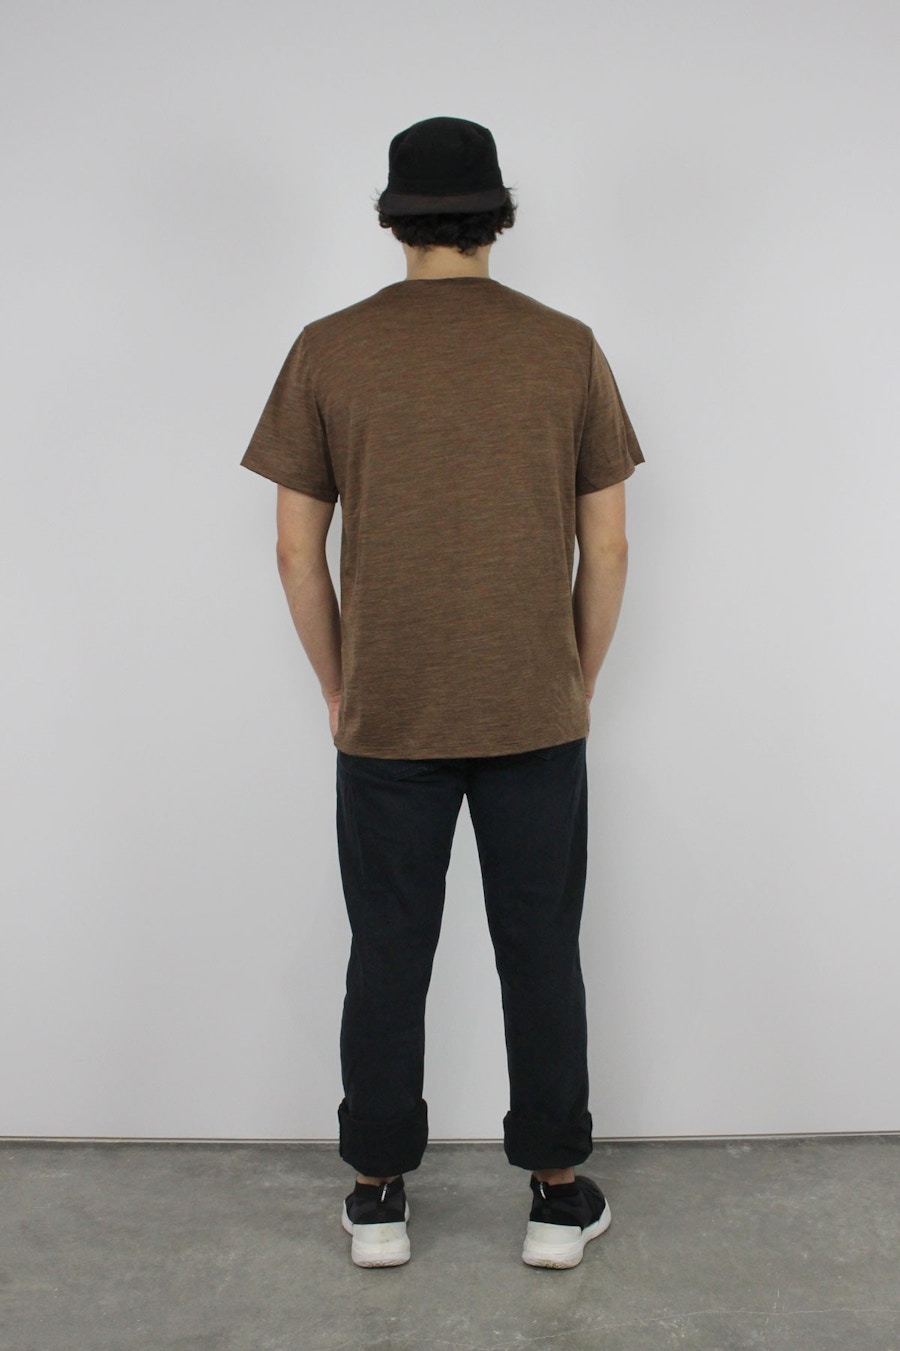 Elbe textiles sage merino tee shirt walnut marle back fabric by the fabric store